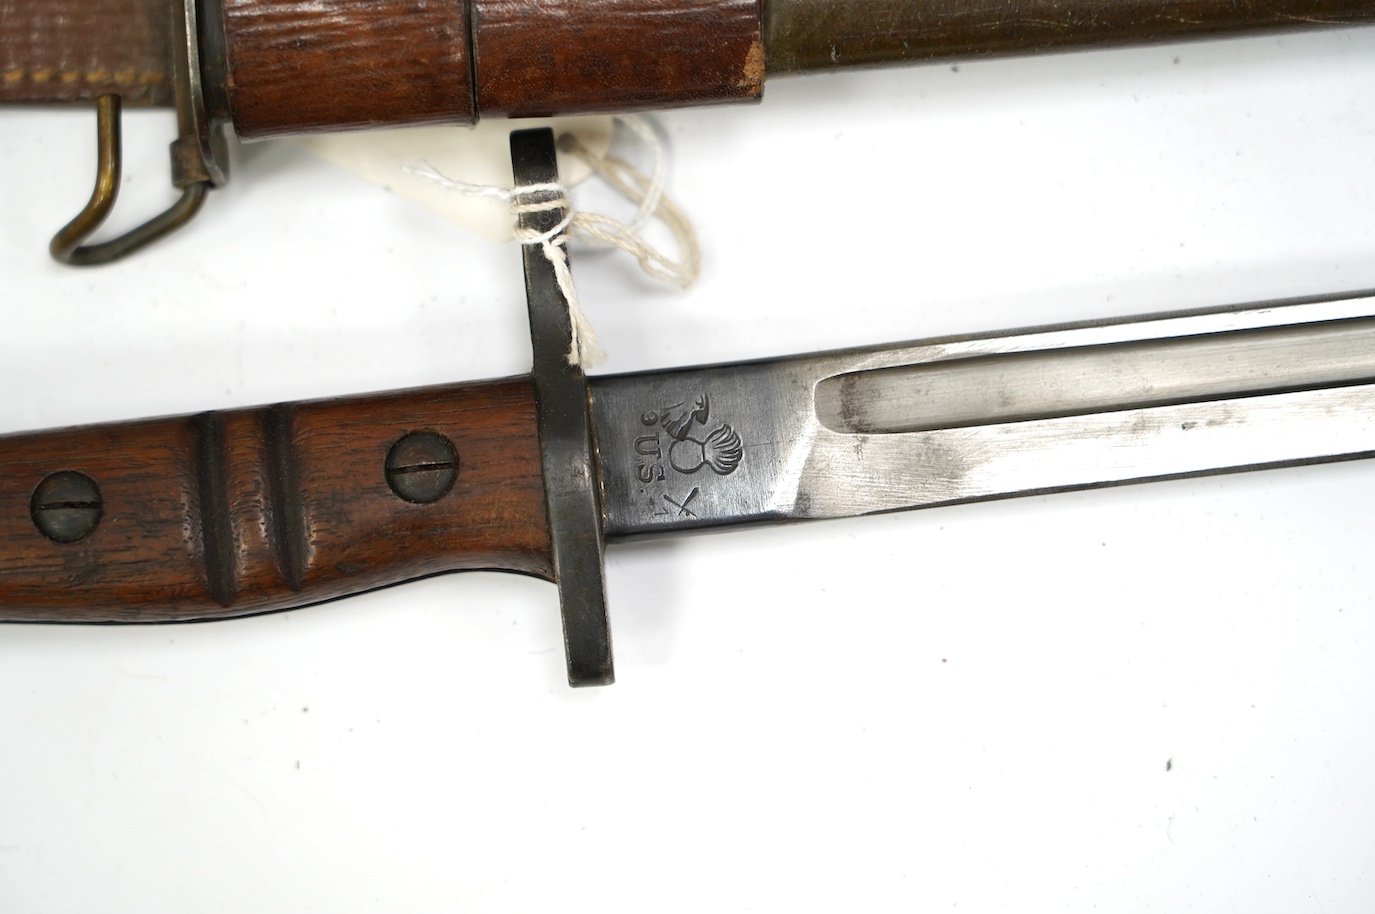 An American 1917 Remington bayonet, based on the earlier British bayonet of 1913, adapted for the 0.3 to 0.6 calibre rifles, with its leather covered scabbard. Condition - good